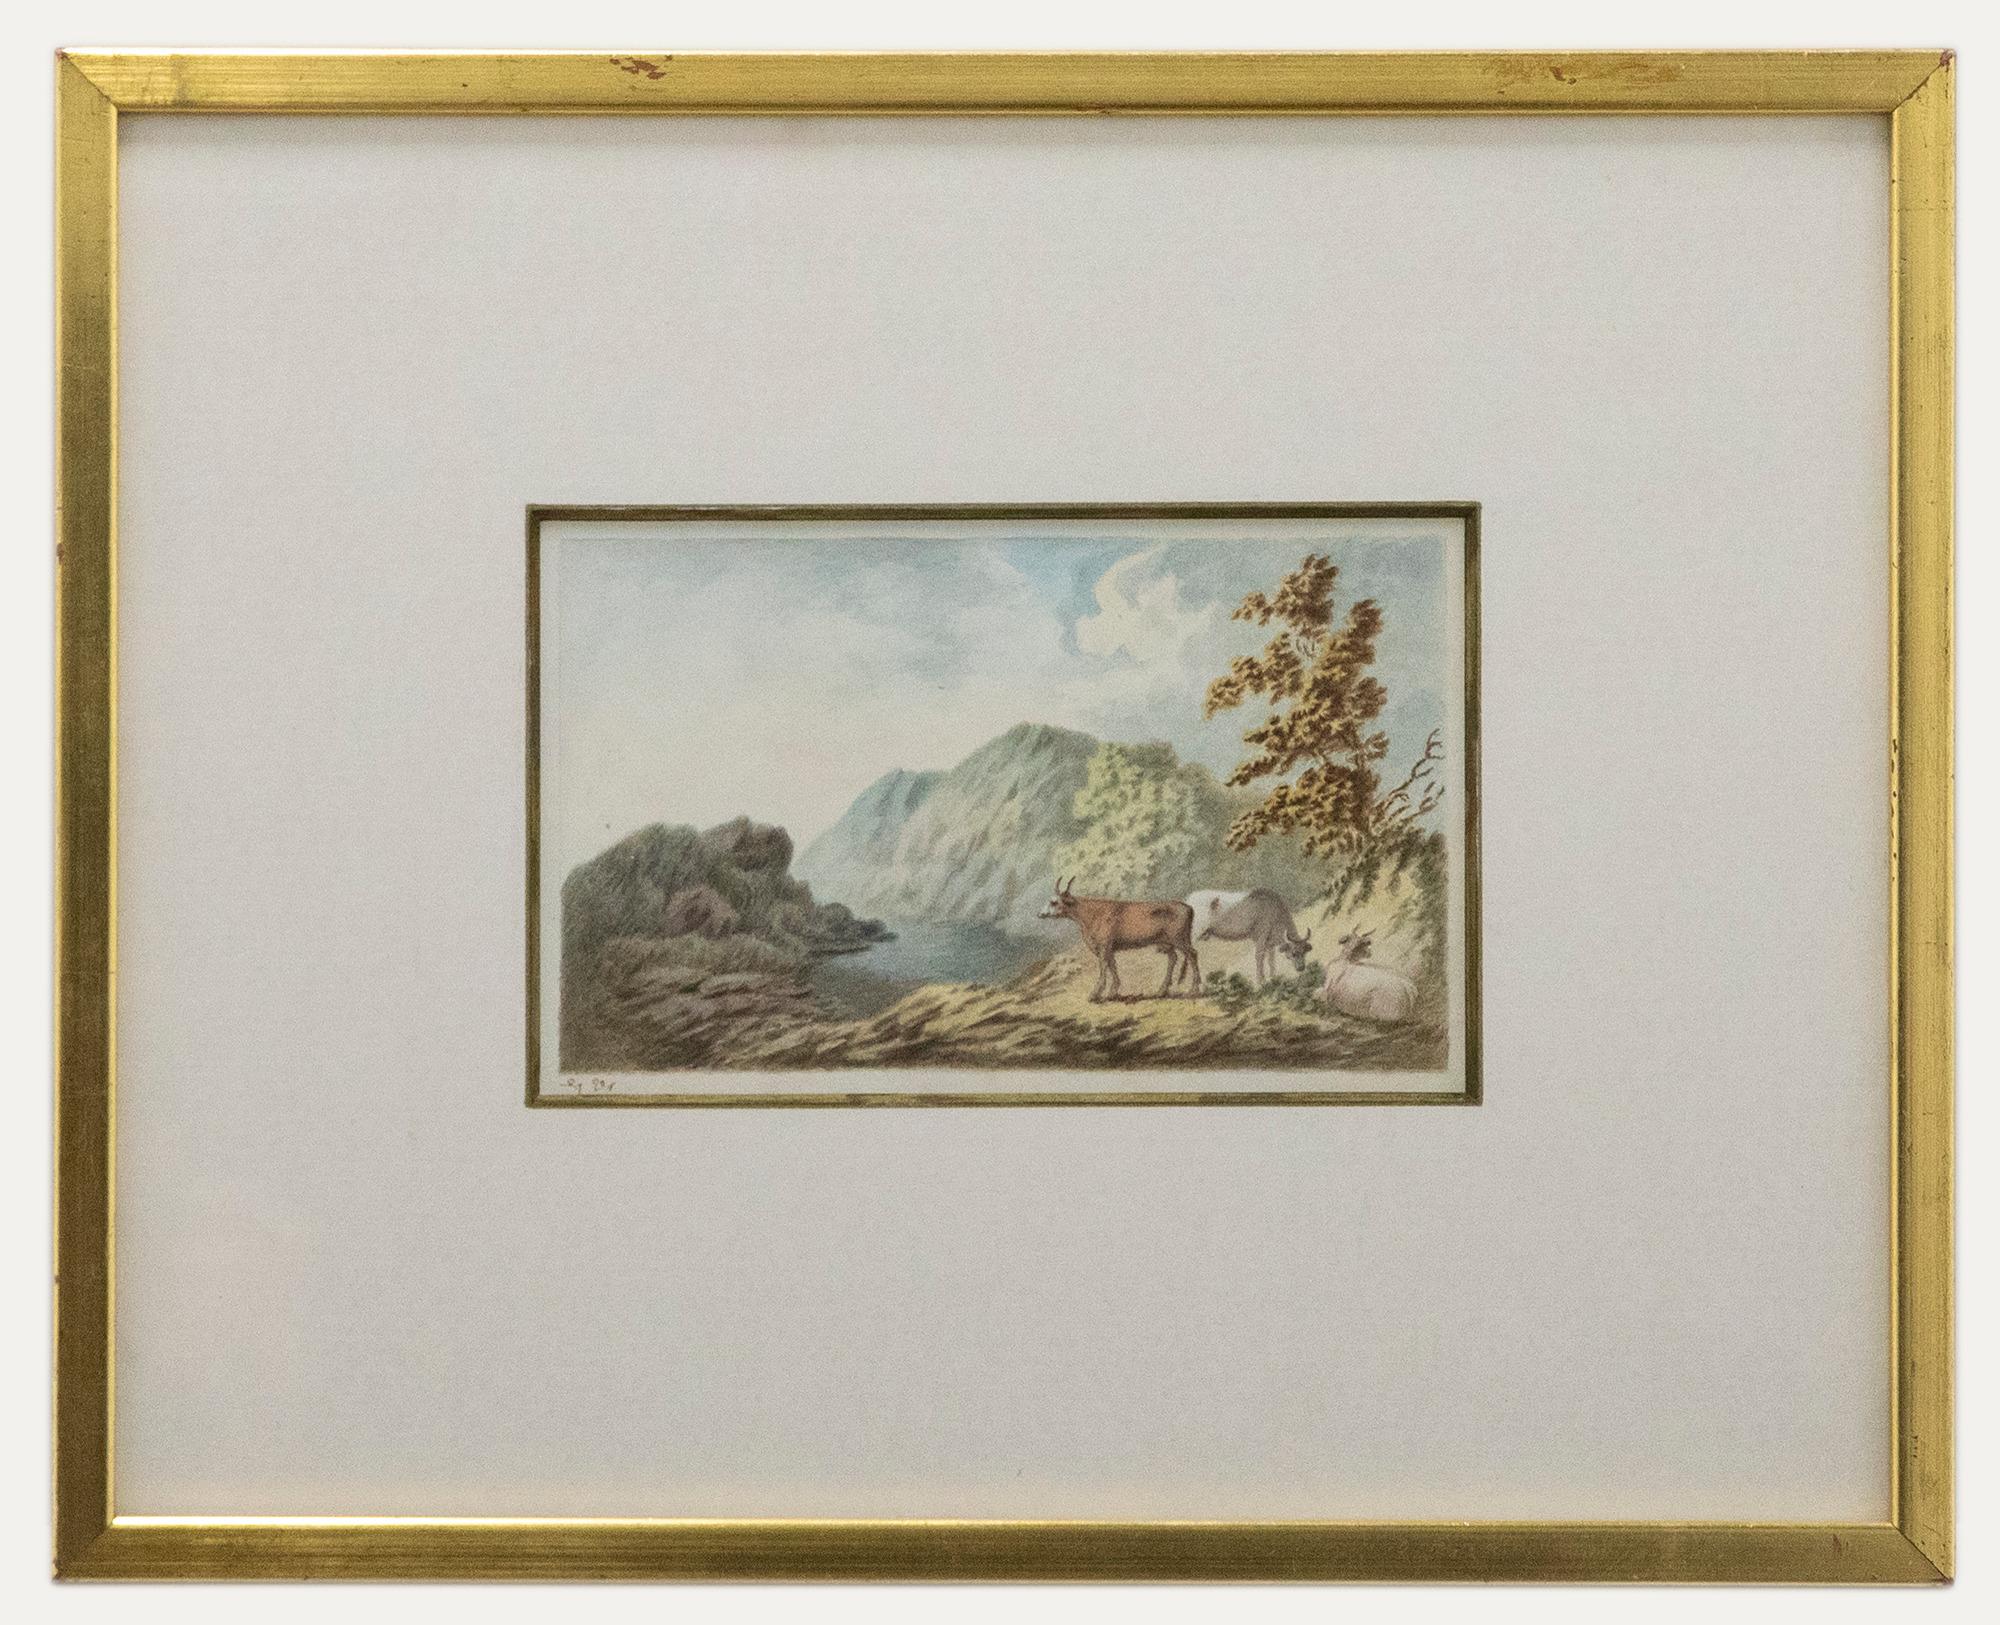 Unknown Landscape Art - George Ely  - Early 19th Century Watercolour, Cattle in the Mountains